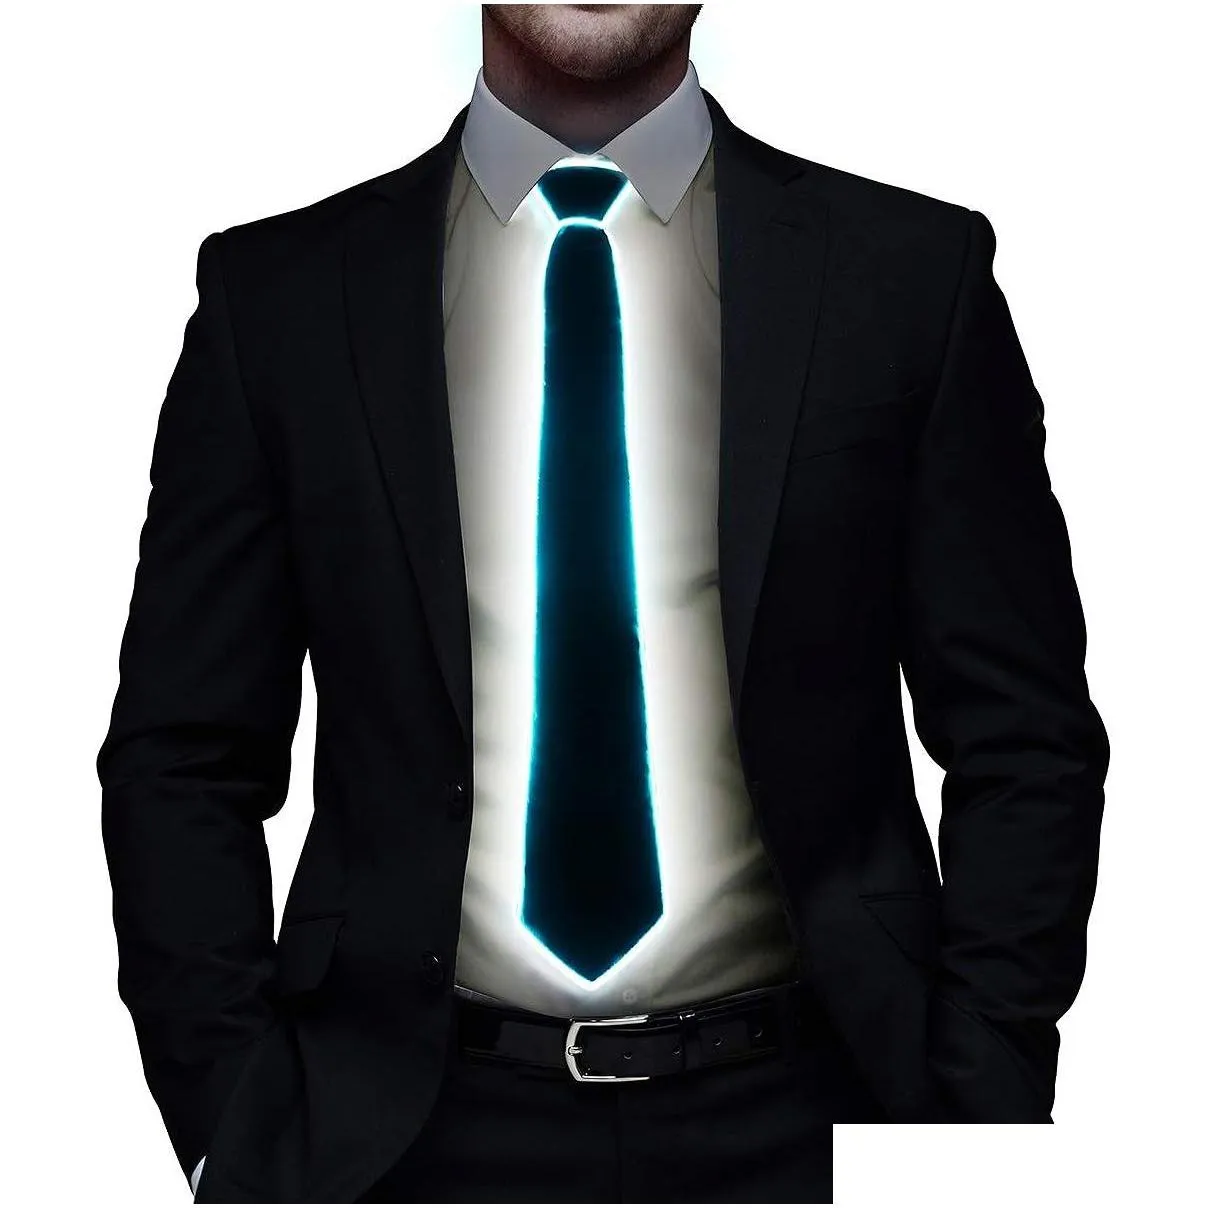 Other Motorcycle Accessories Led Tie Light Up Fanny Ties Novelty Necktie For Men Motorcycle Accessory Drop Delivery Automobiles Motorc Dhdje